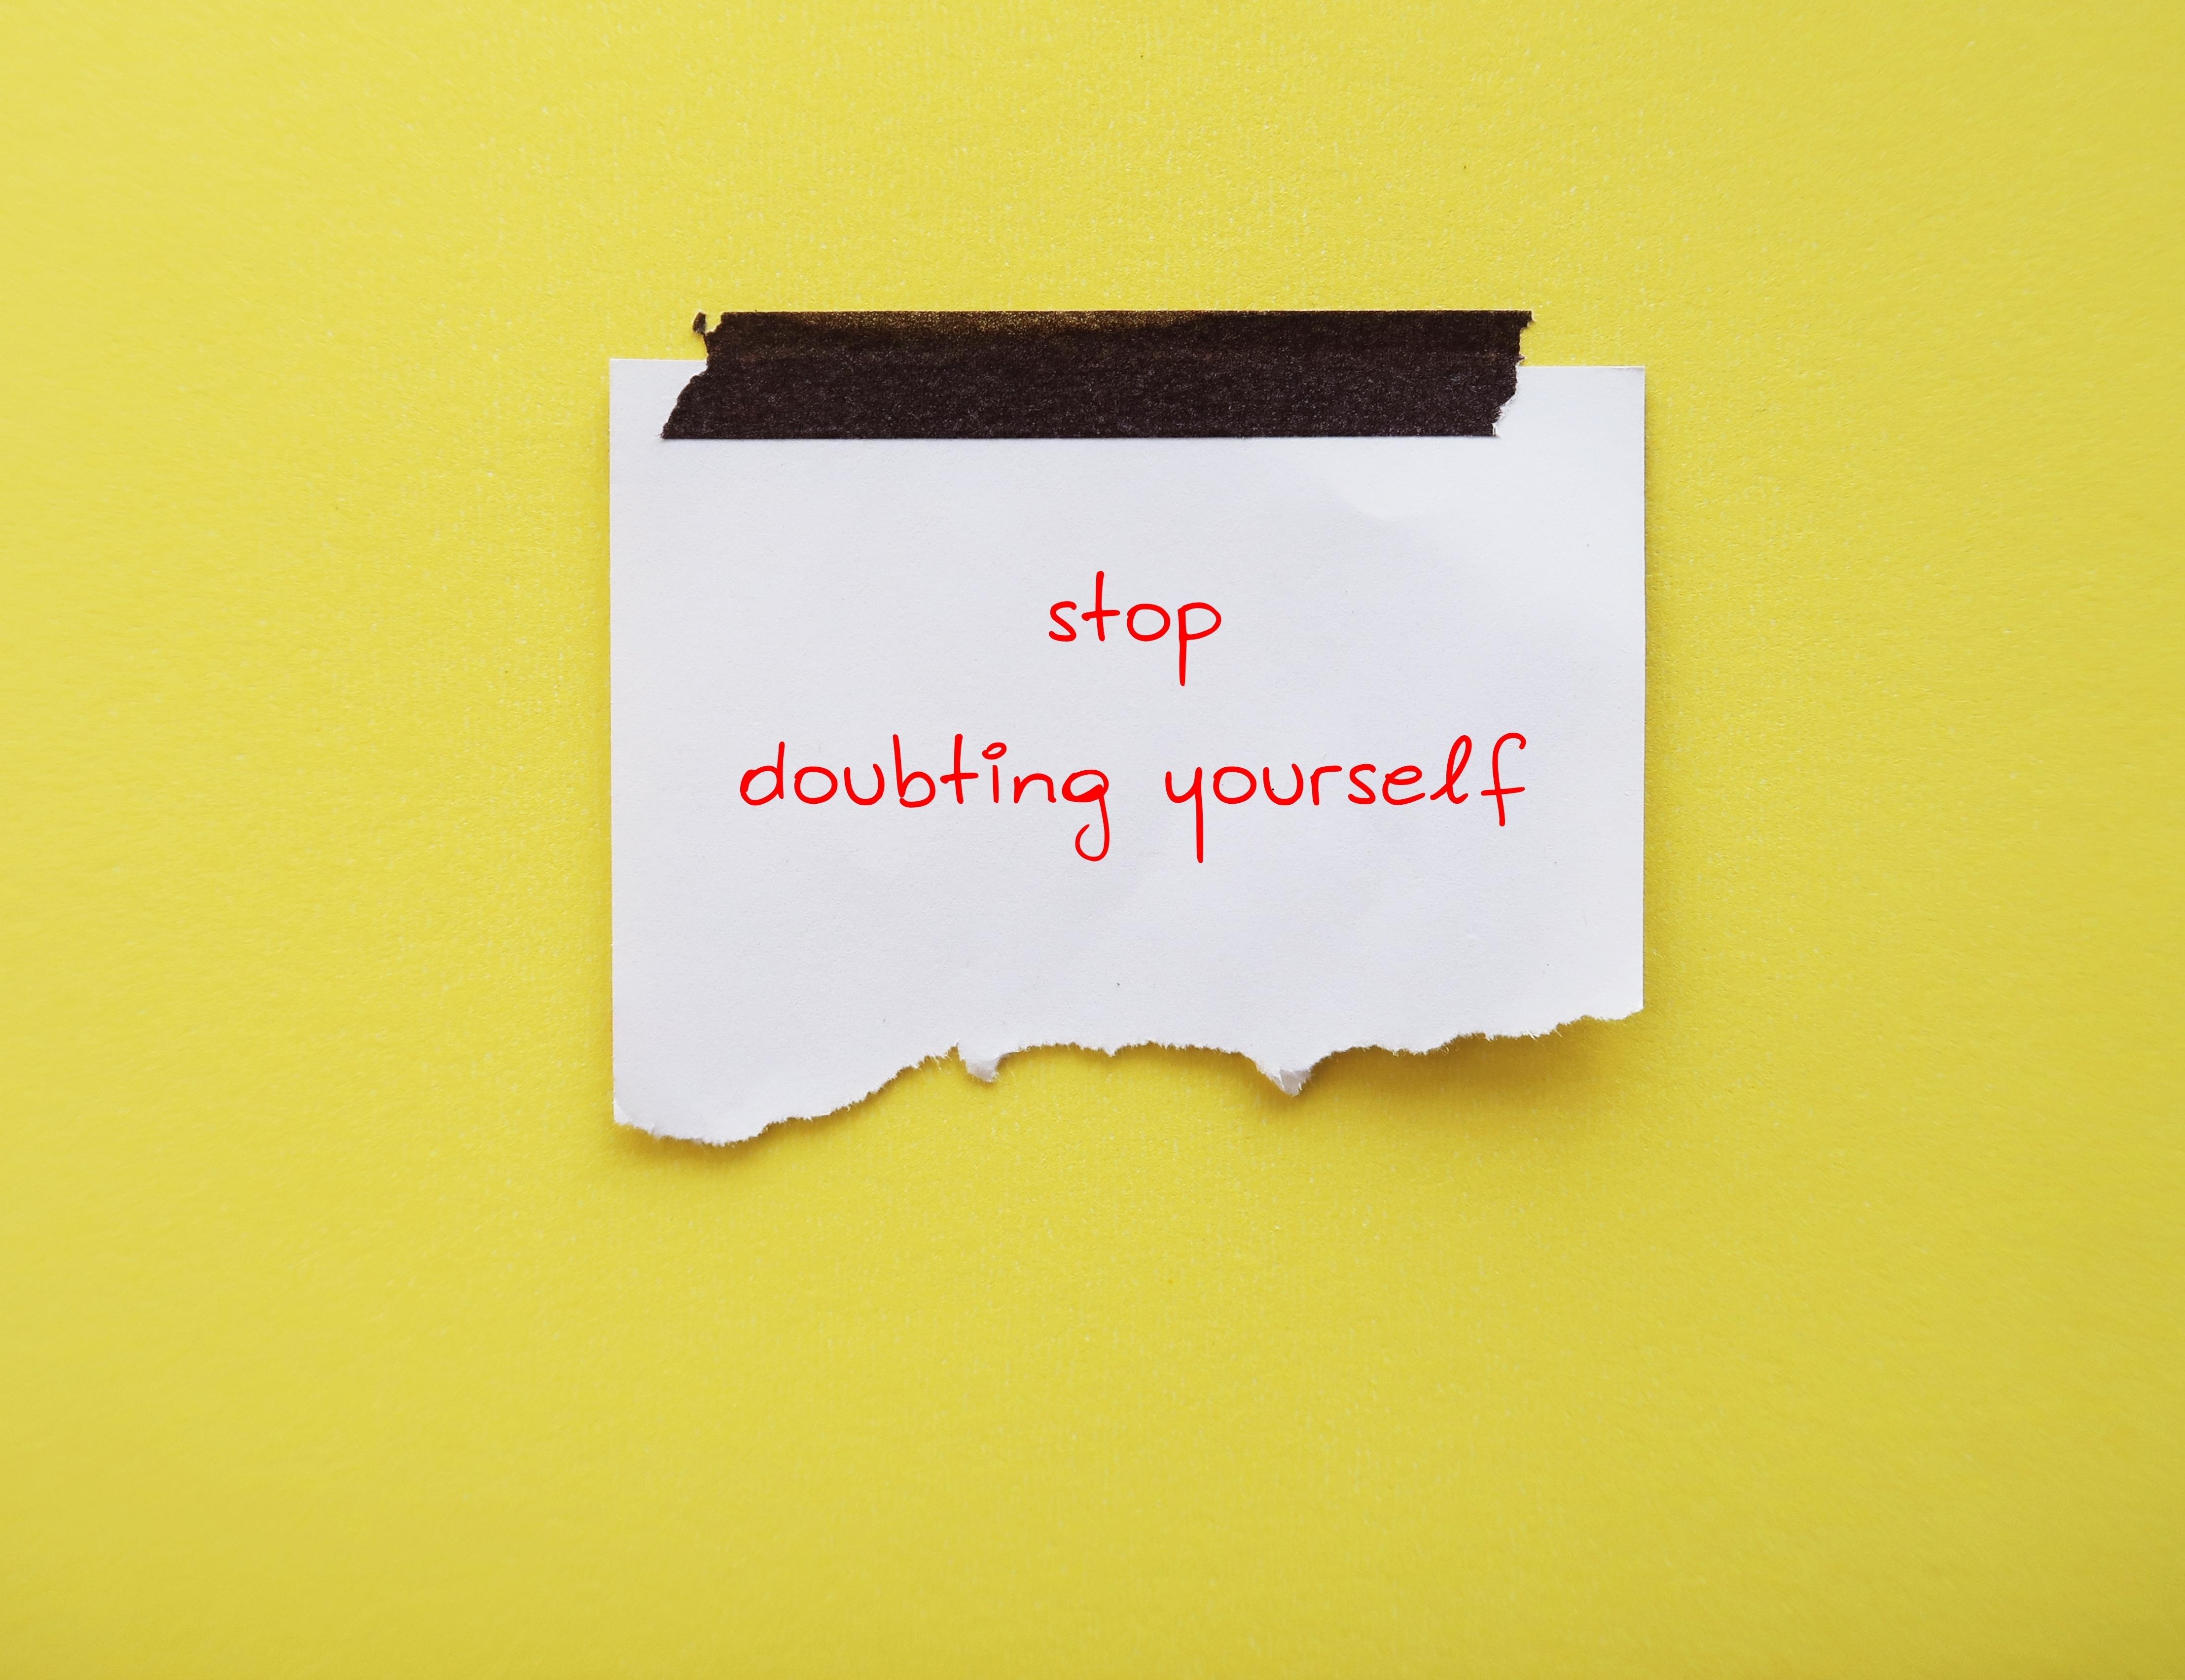 A white piece of paper on a yellow background with 'stop doubting yourself' written on it